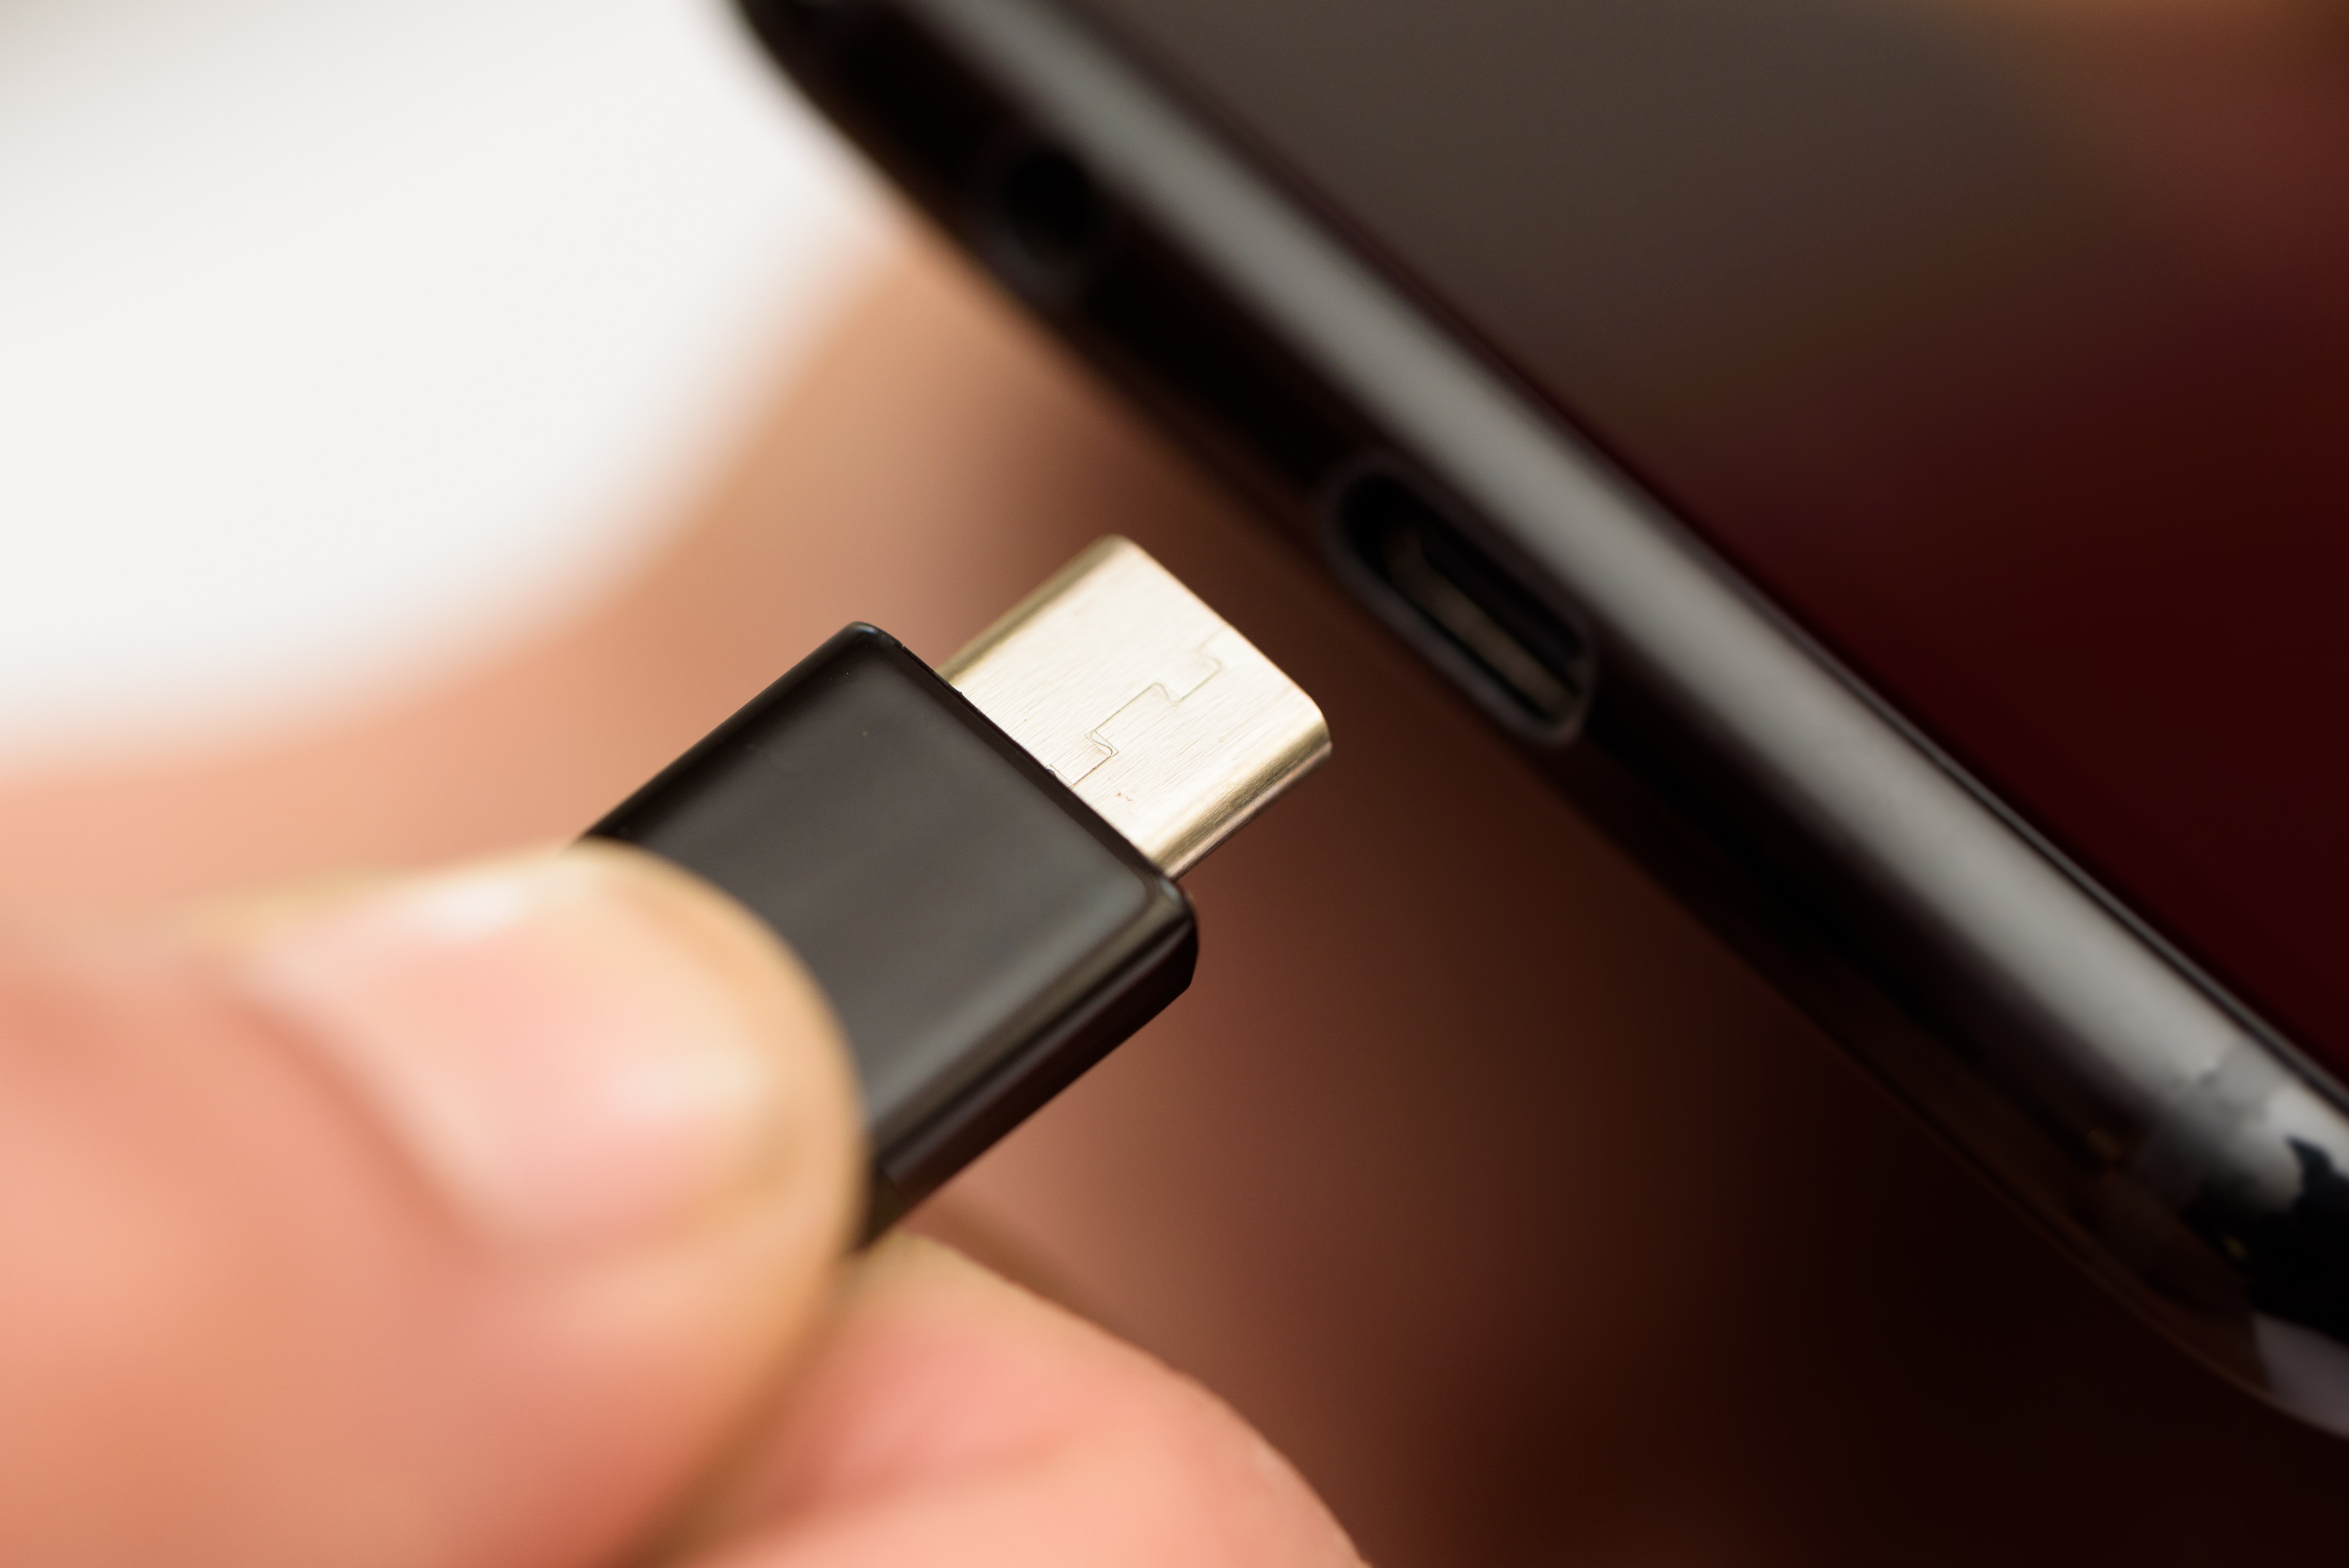 Apple said to be testing a switch to USB-C for future iPhones